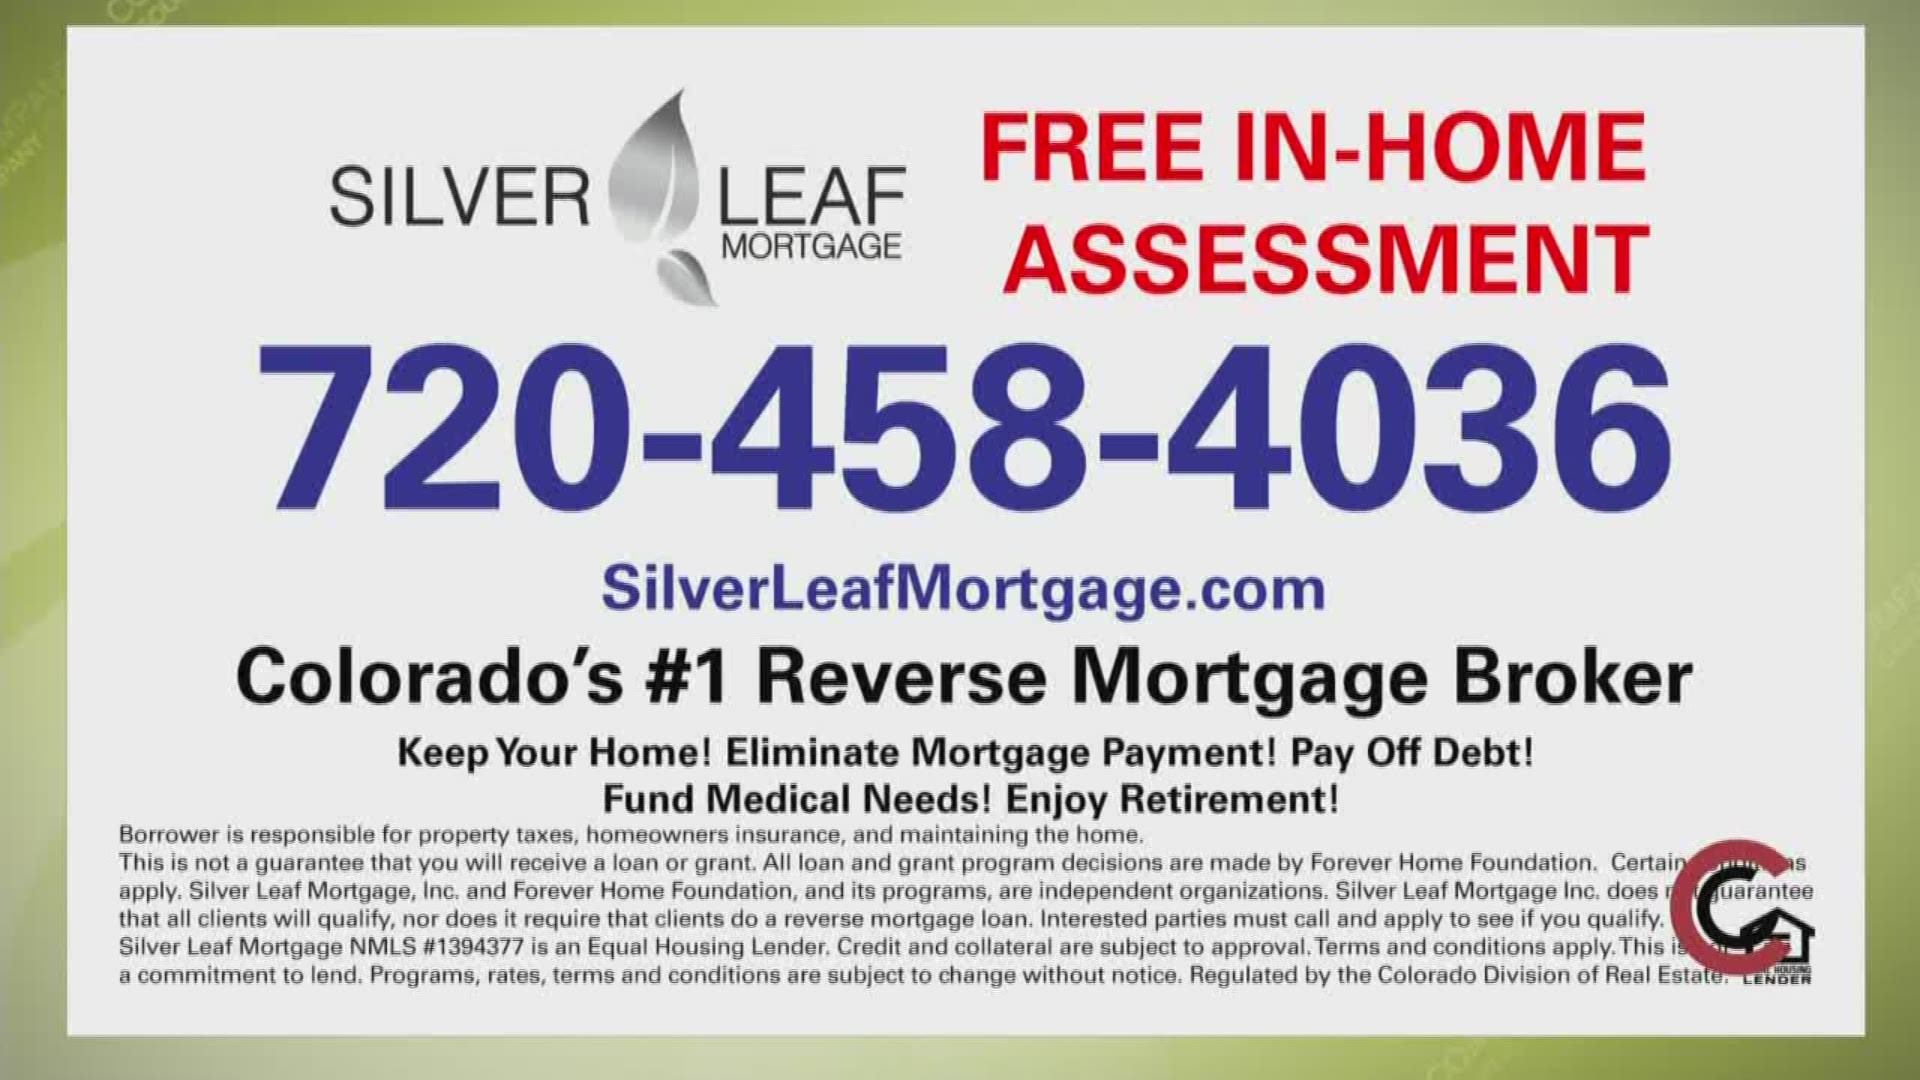 Learn more about reverse mortgages and meet your financial goals in retirement at SilverLeafMortgage.com. You can also call 720.458.4036.